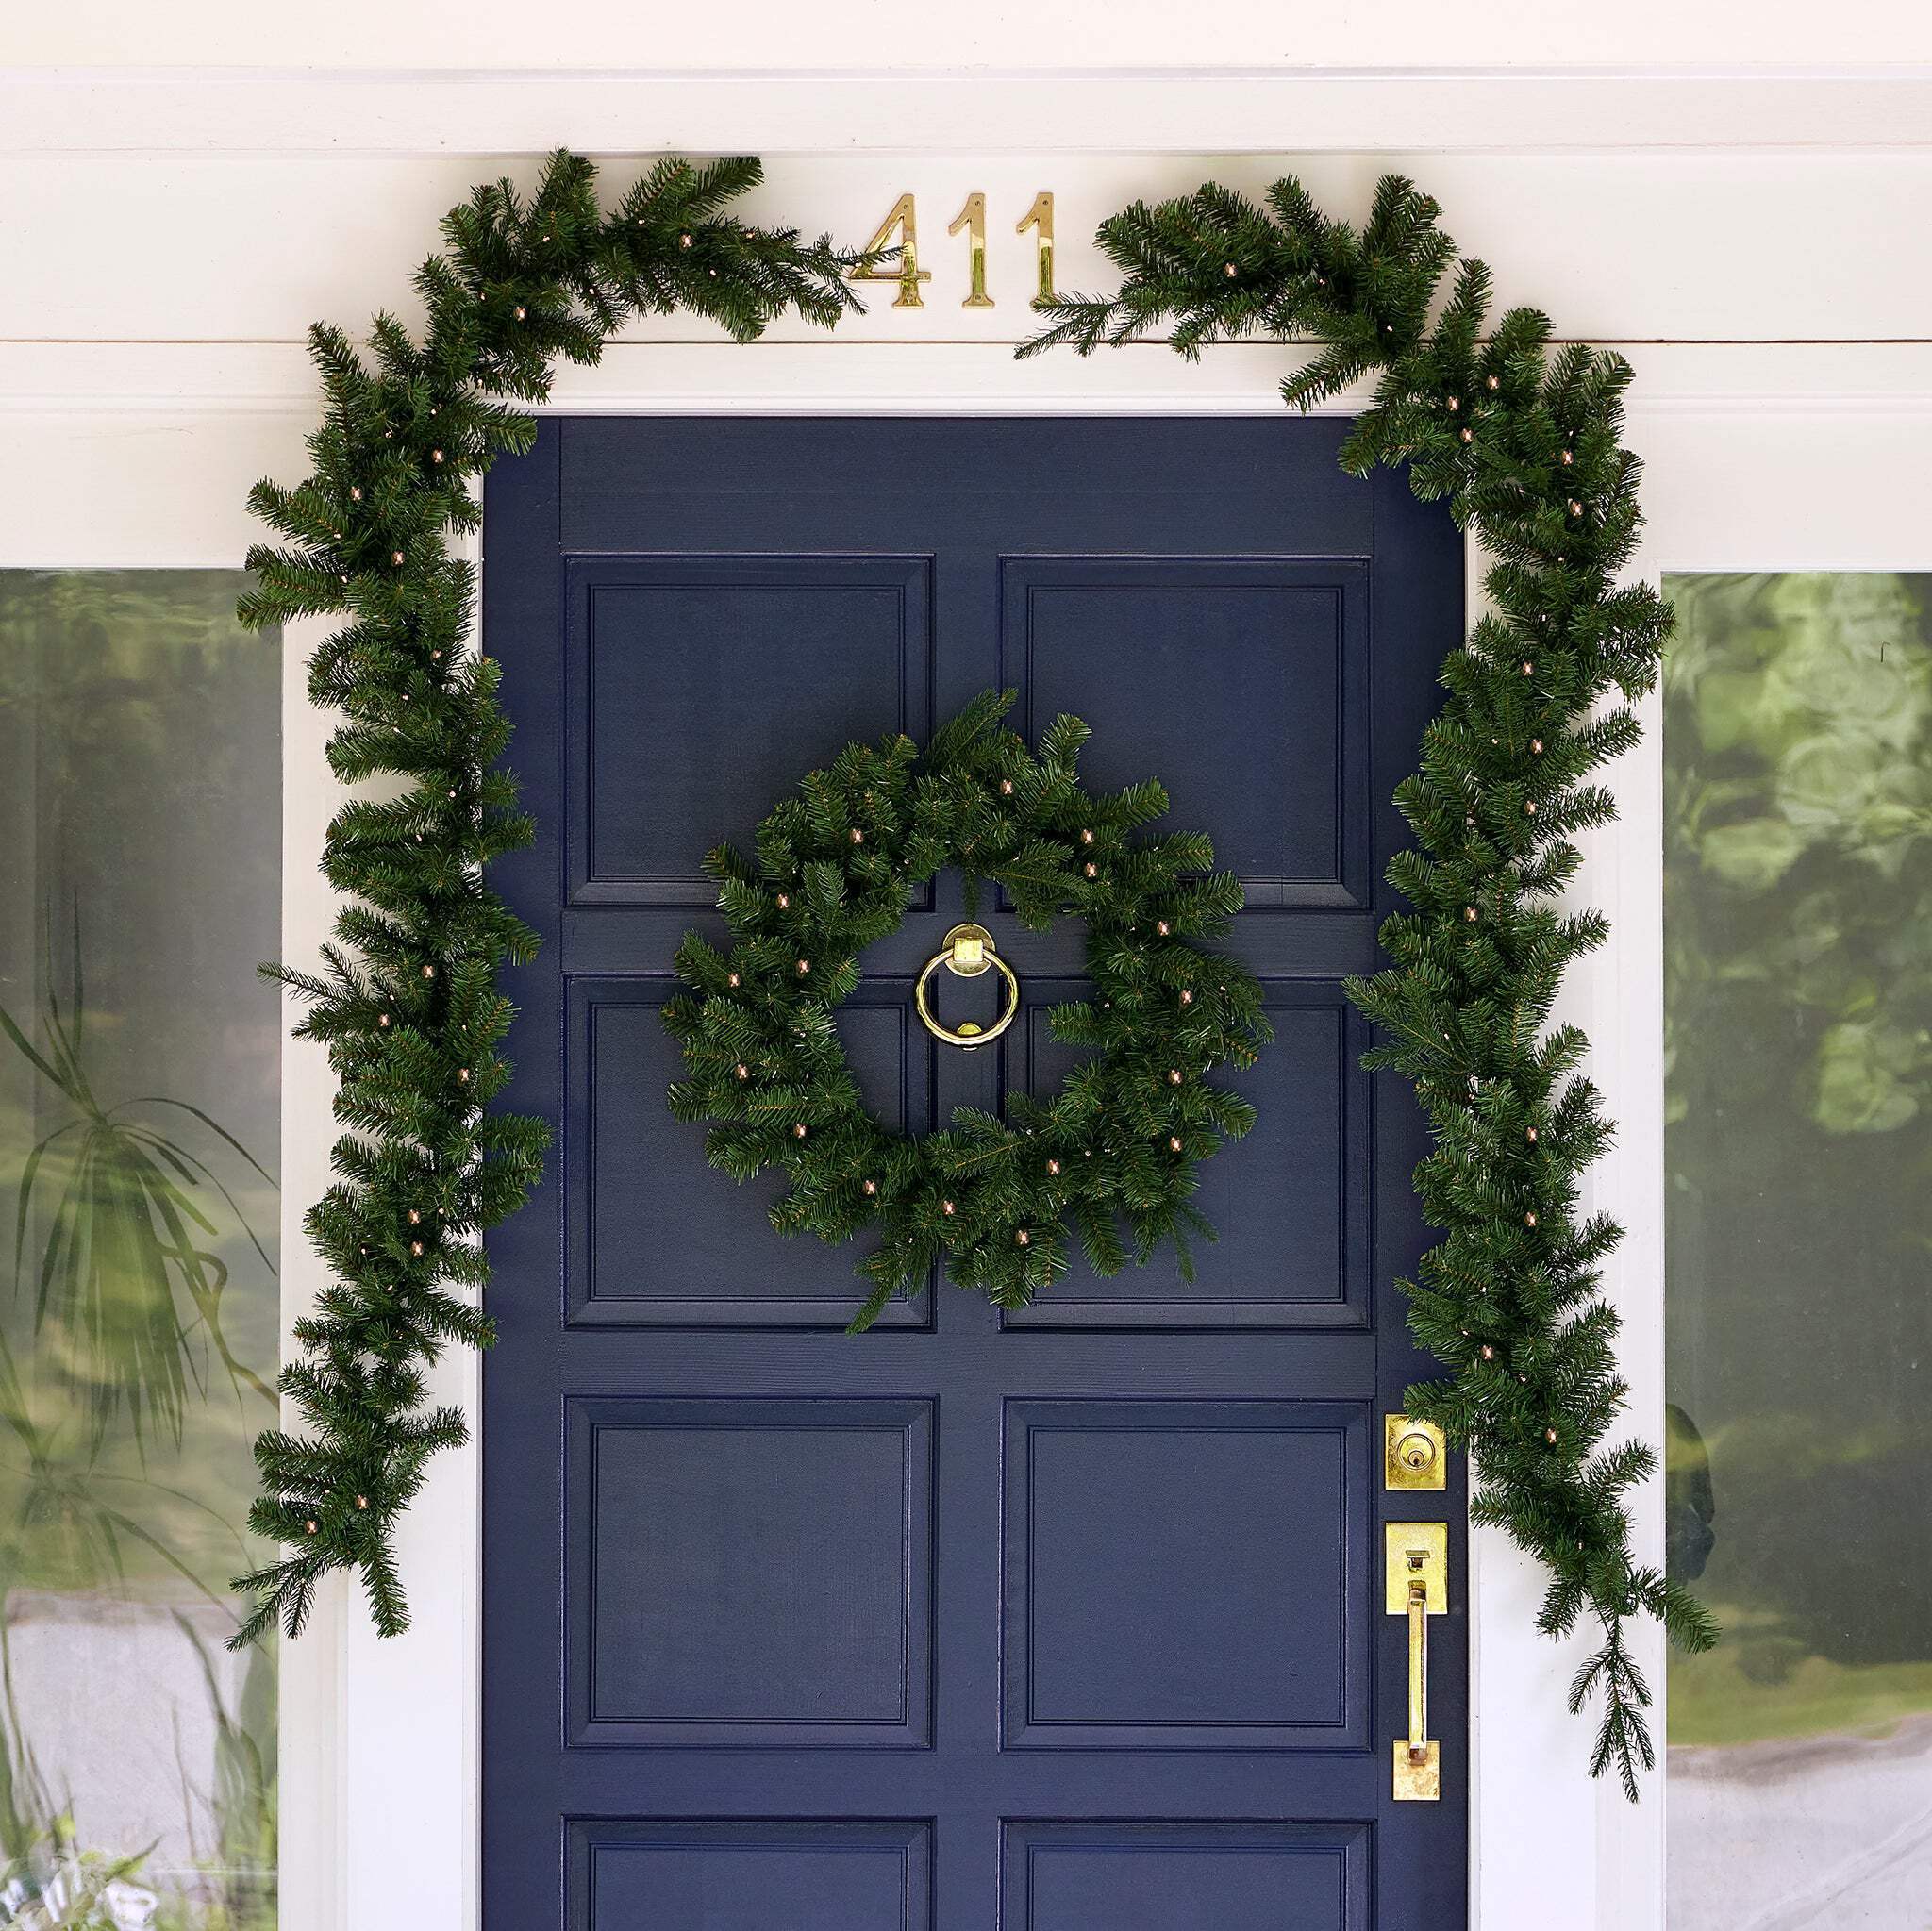 Green Valley Pine 3-Piece Pre-Lit Door Kit (Includes One 24" Wreath and Two 6ft Garlands) by Seasonal LLC - image 1 of 4